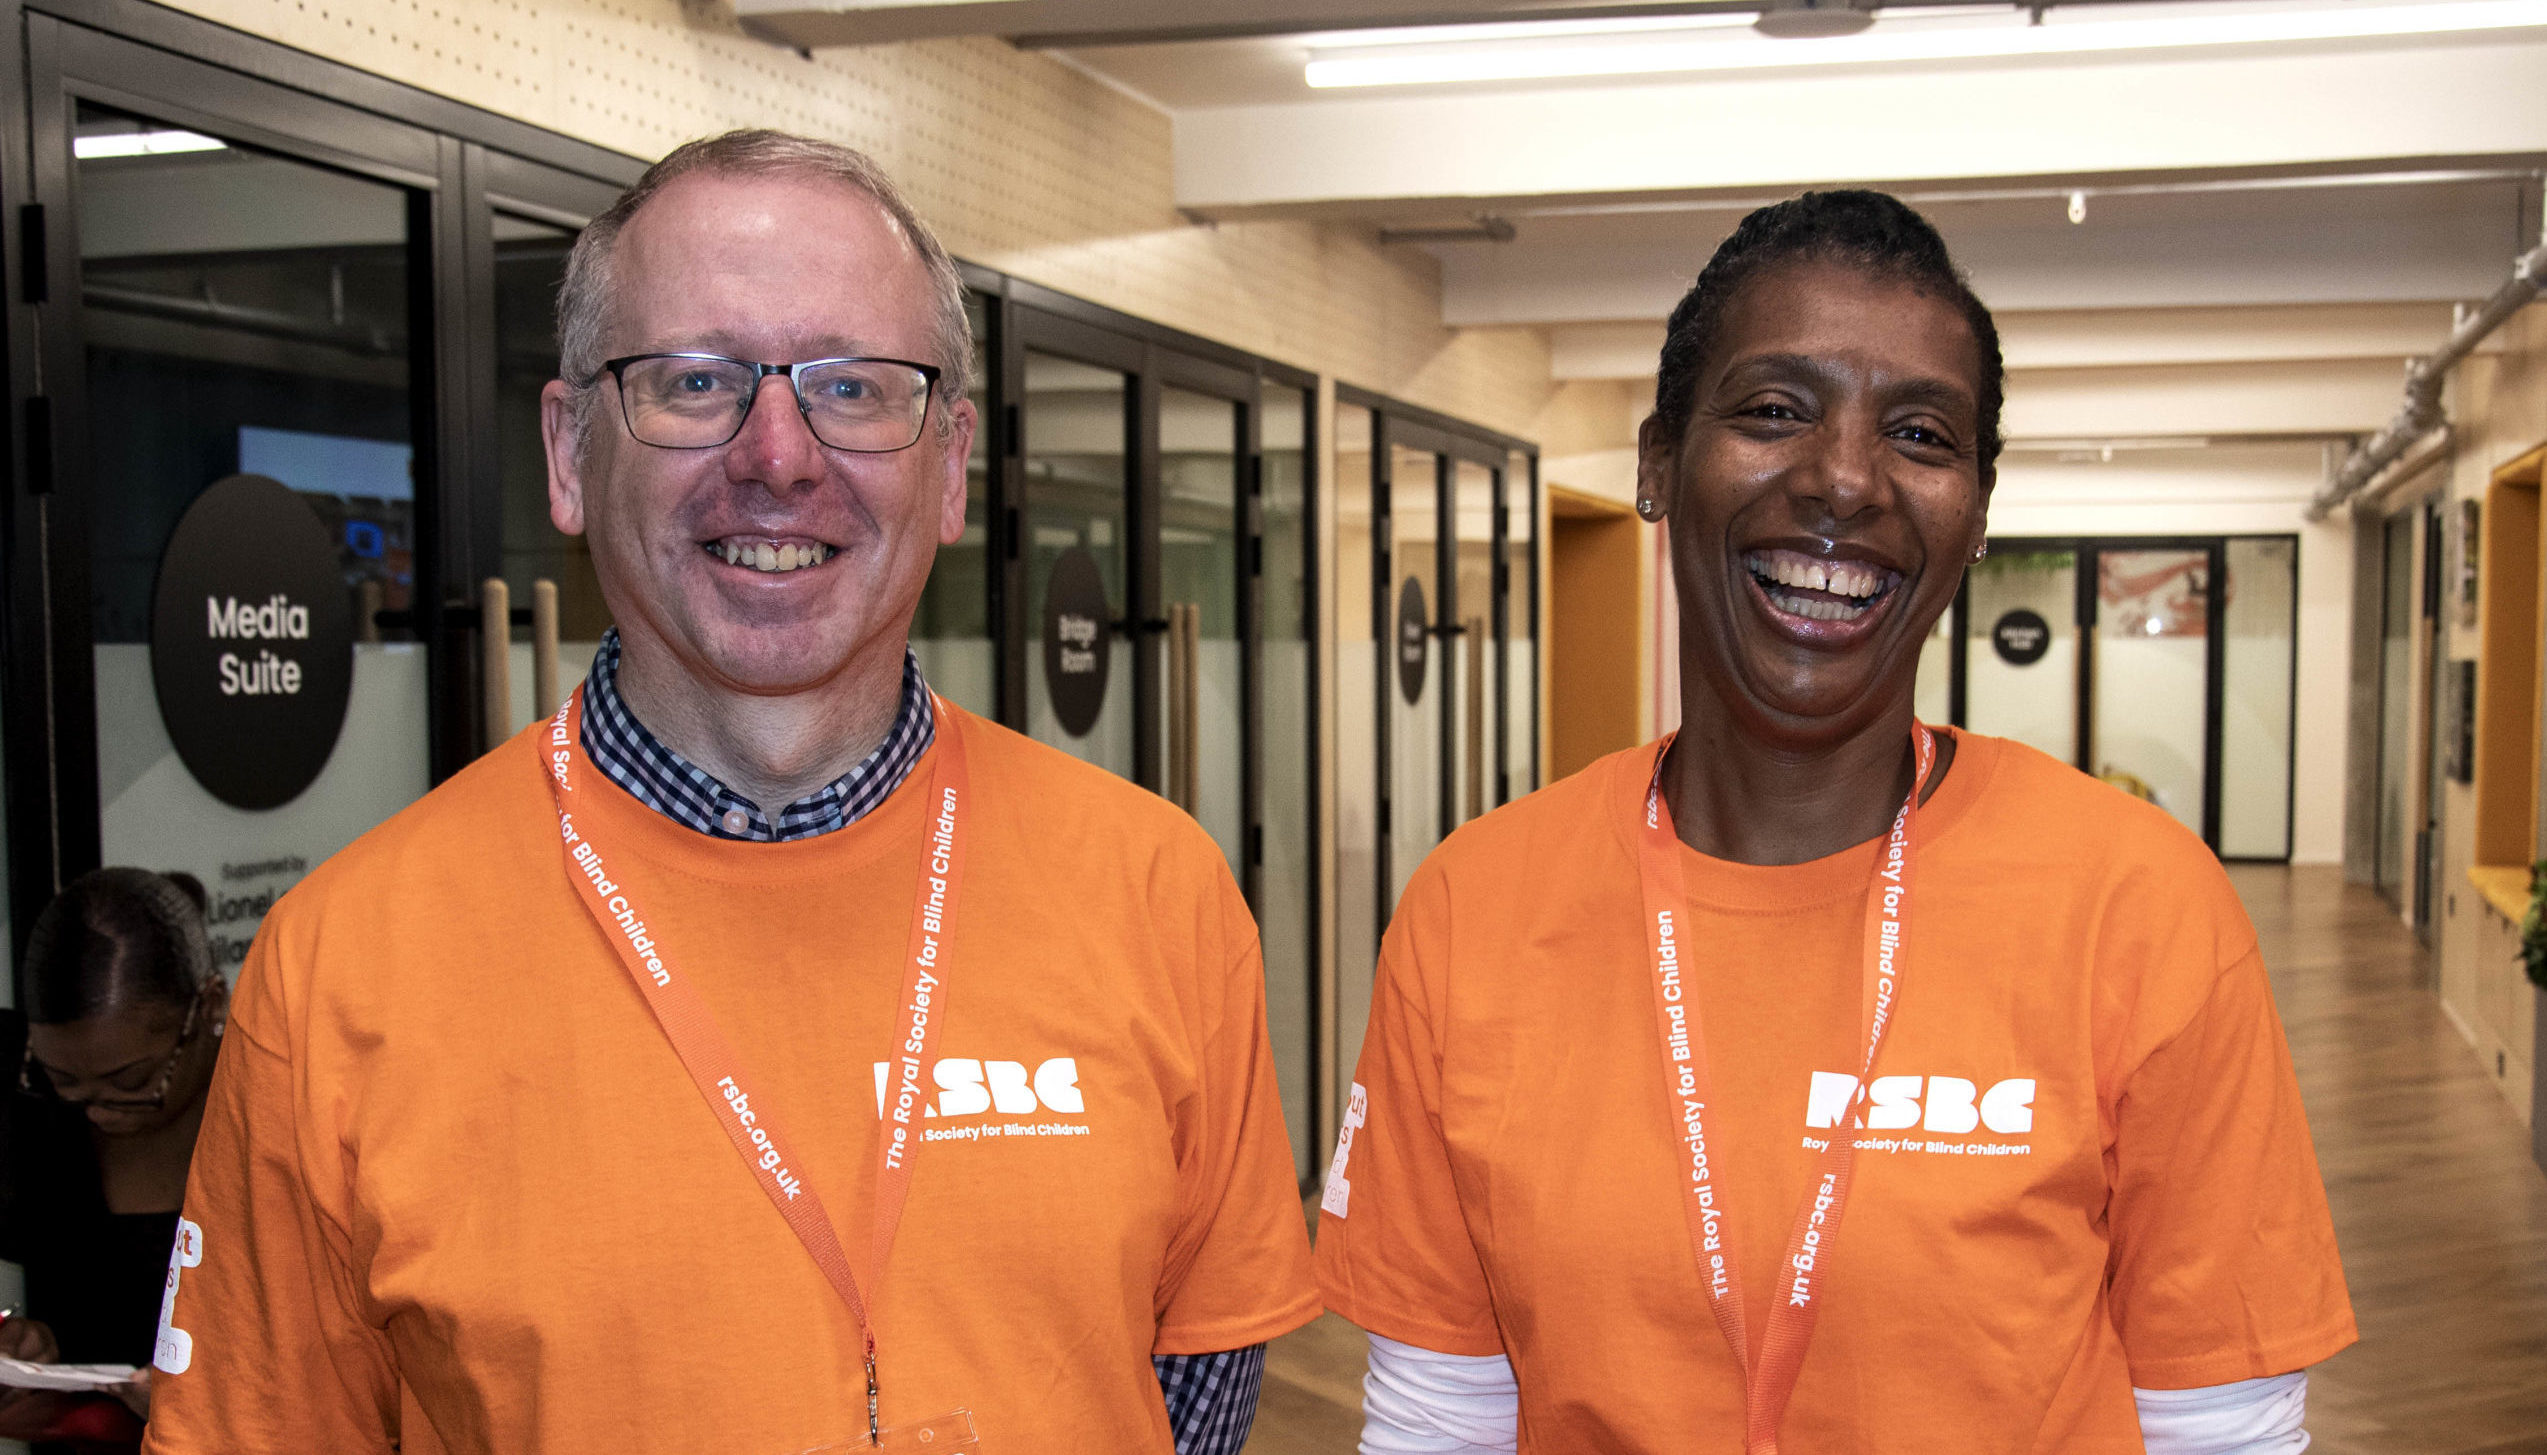 2 people smiling and wearing a RSBC volunteer t-shirt